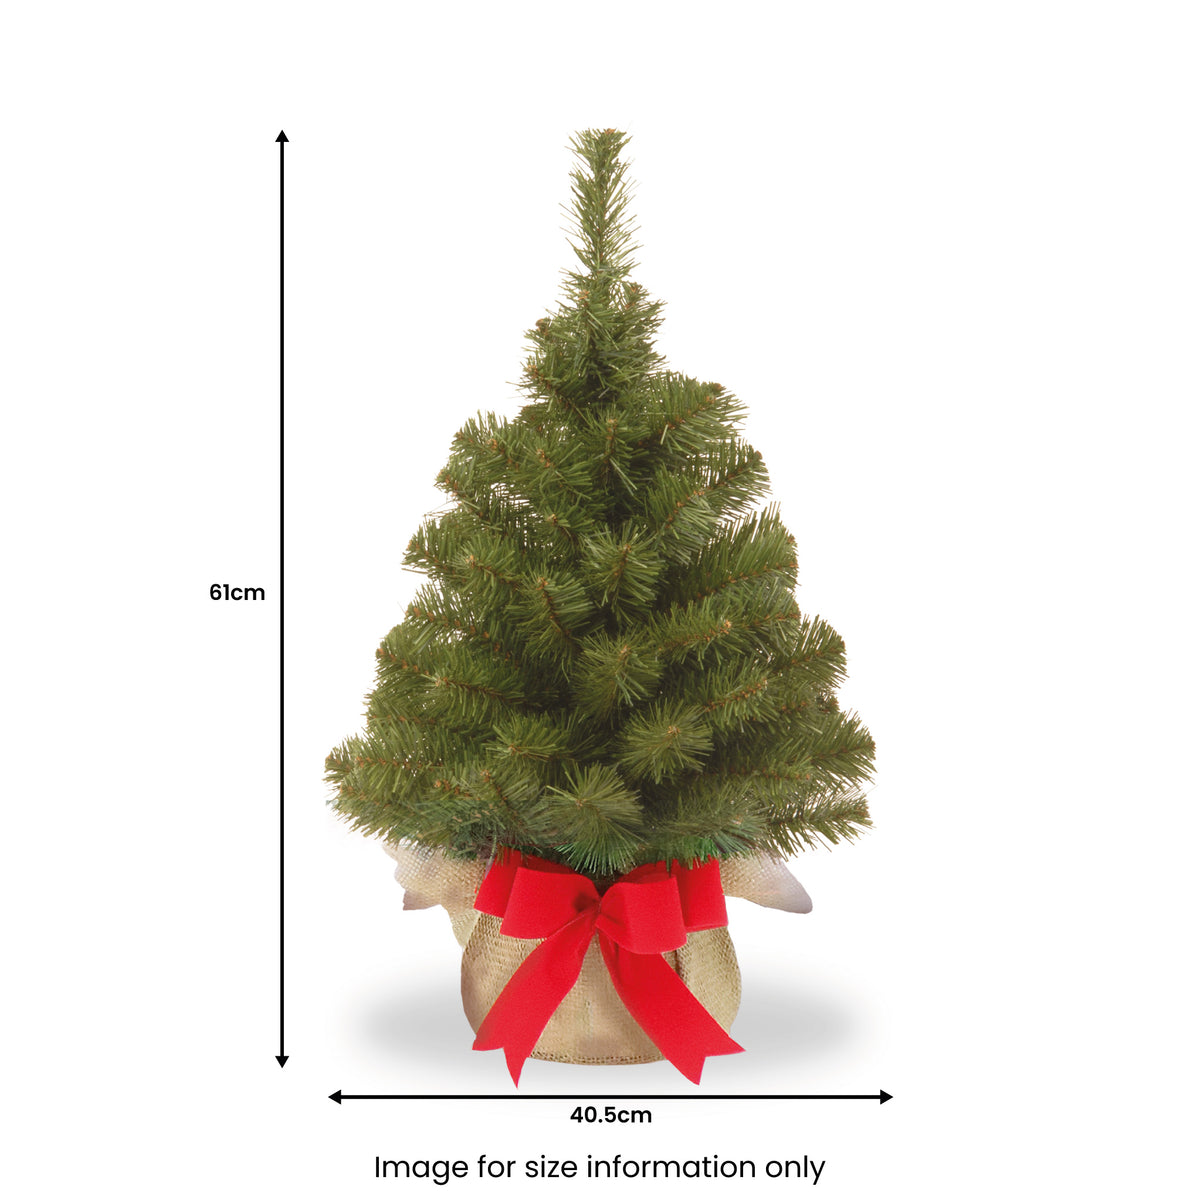 Nobel Spruce 2ft Tree In Burlap Bag with Red Bow From Roseland Furniture